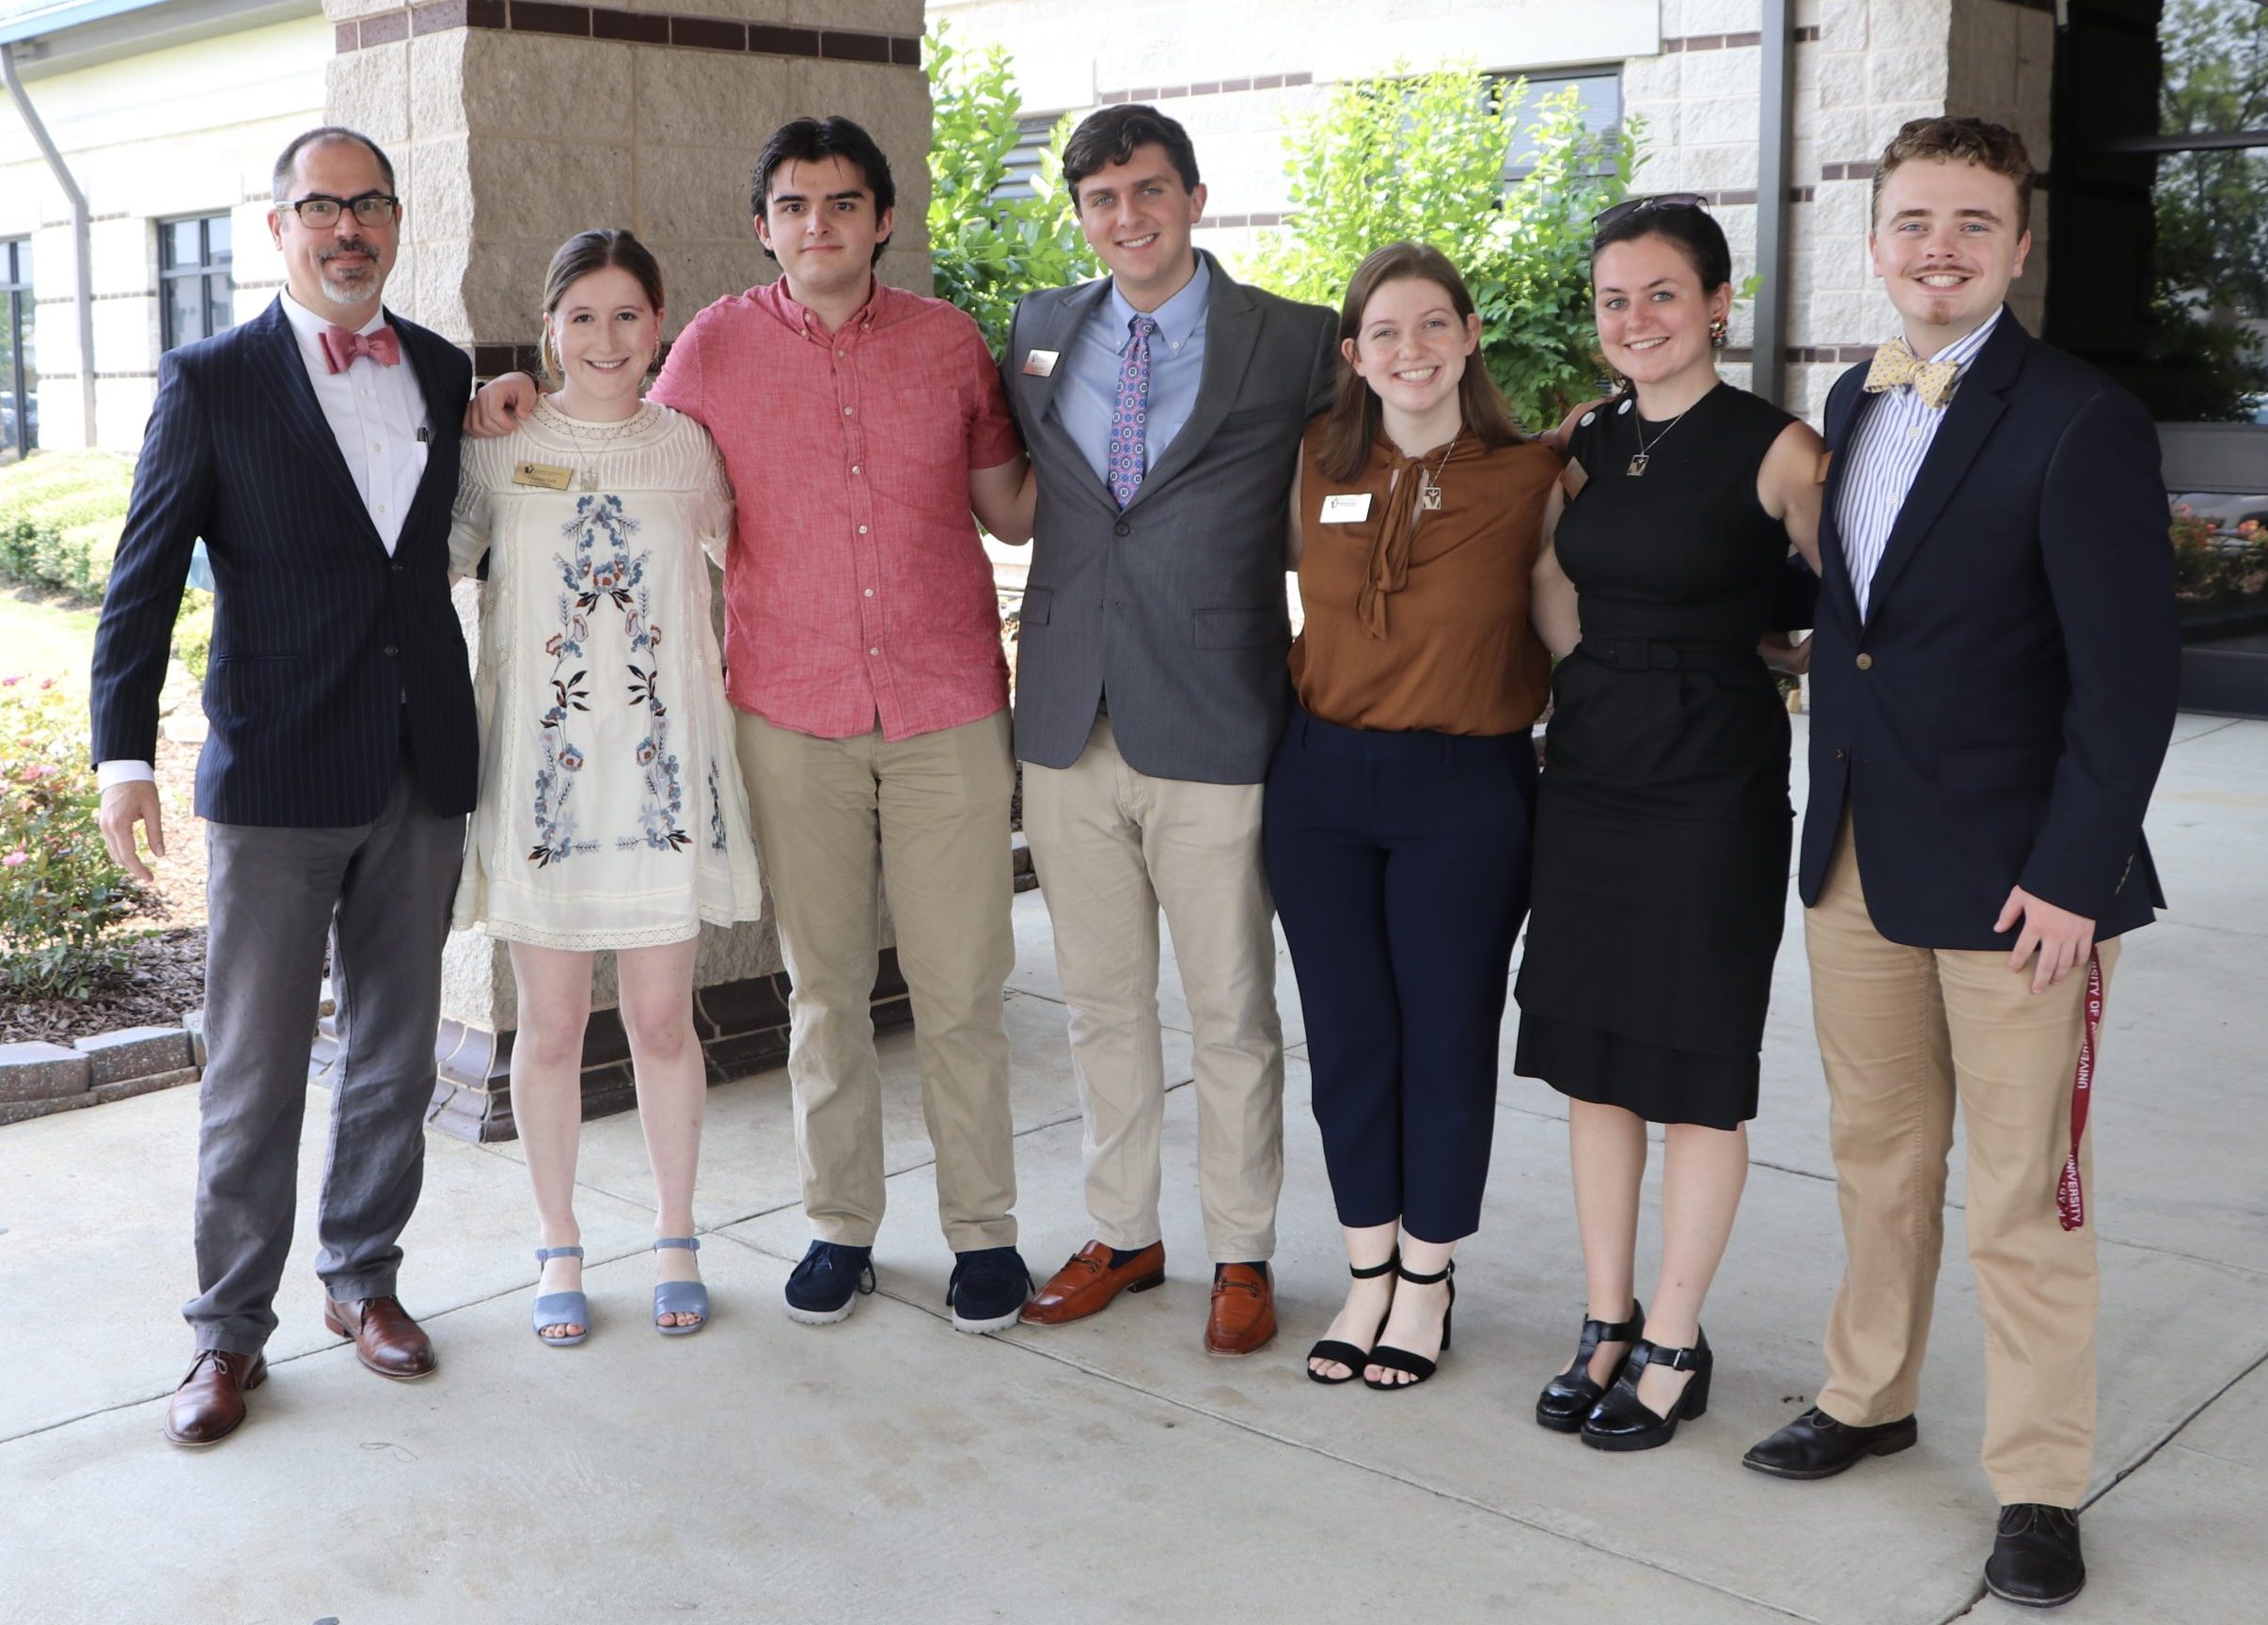 Blount Scholars Virginia Saft (2nd from the left) and John Pace (4th from the left) and Ariel Jones (6th from the left) at the end of their JOIP Walker County Internship.